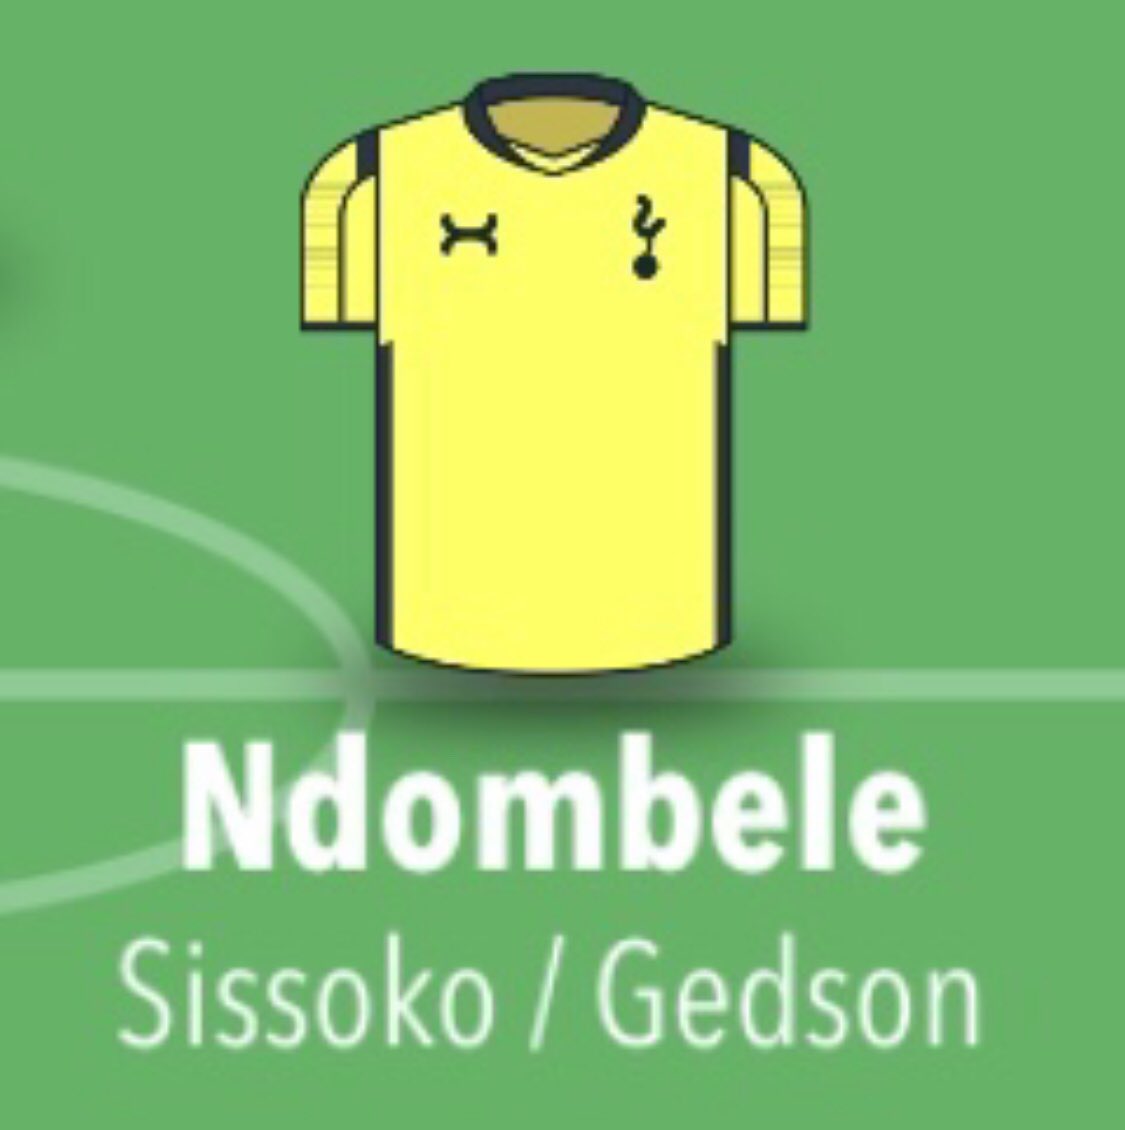 CM -•Ndombele - Starter•Gedson - Back-up•Sissoko - Back-up or SellTanguy is one of our best players and gets into pretty much any other midfield. Gedson has shown glimpse in his limited time and looks promising. Moussa could stay but if there’s a deal then I’d sell